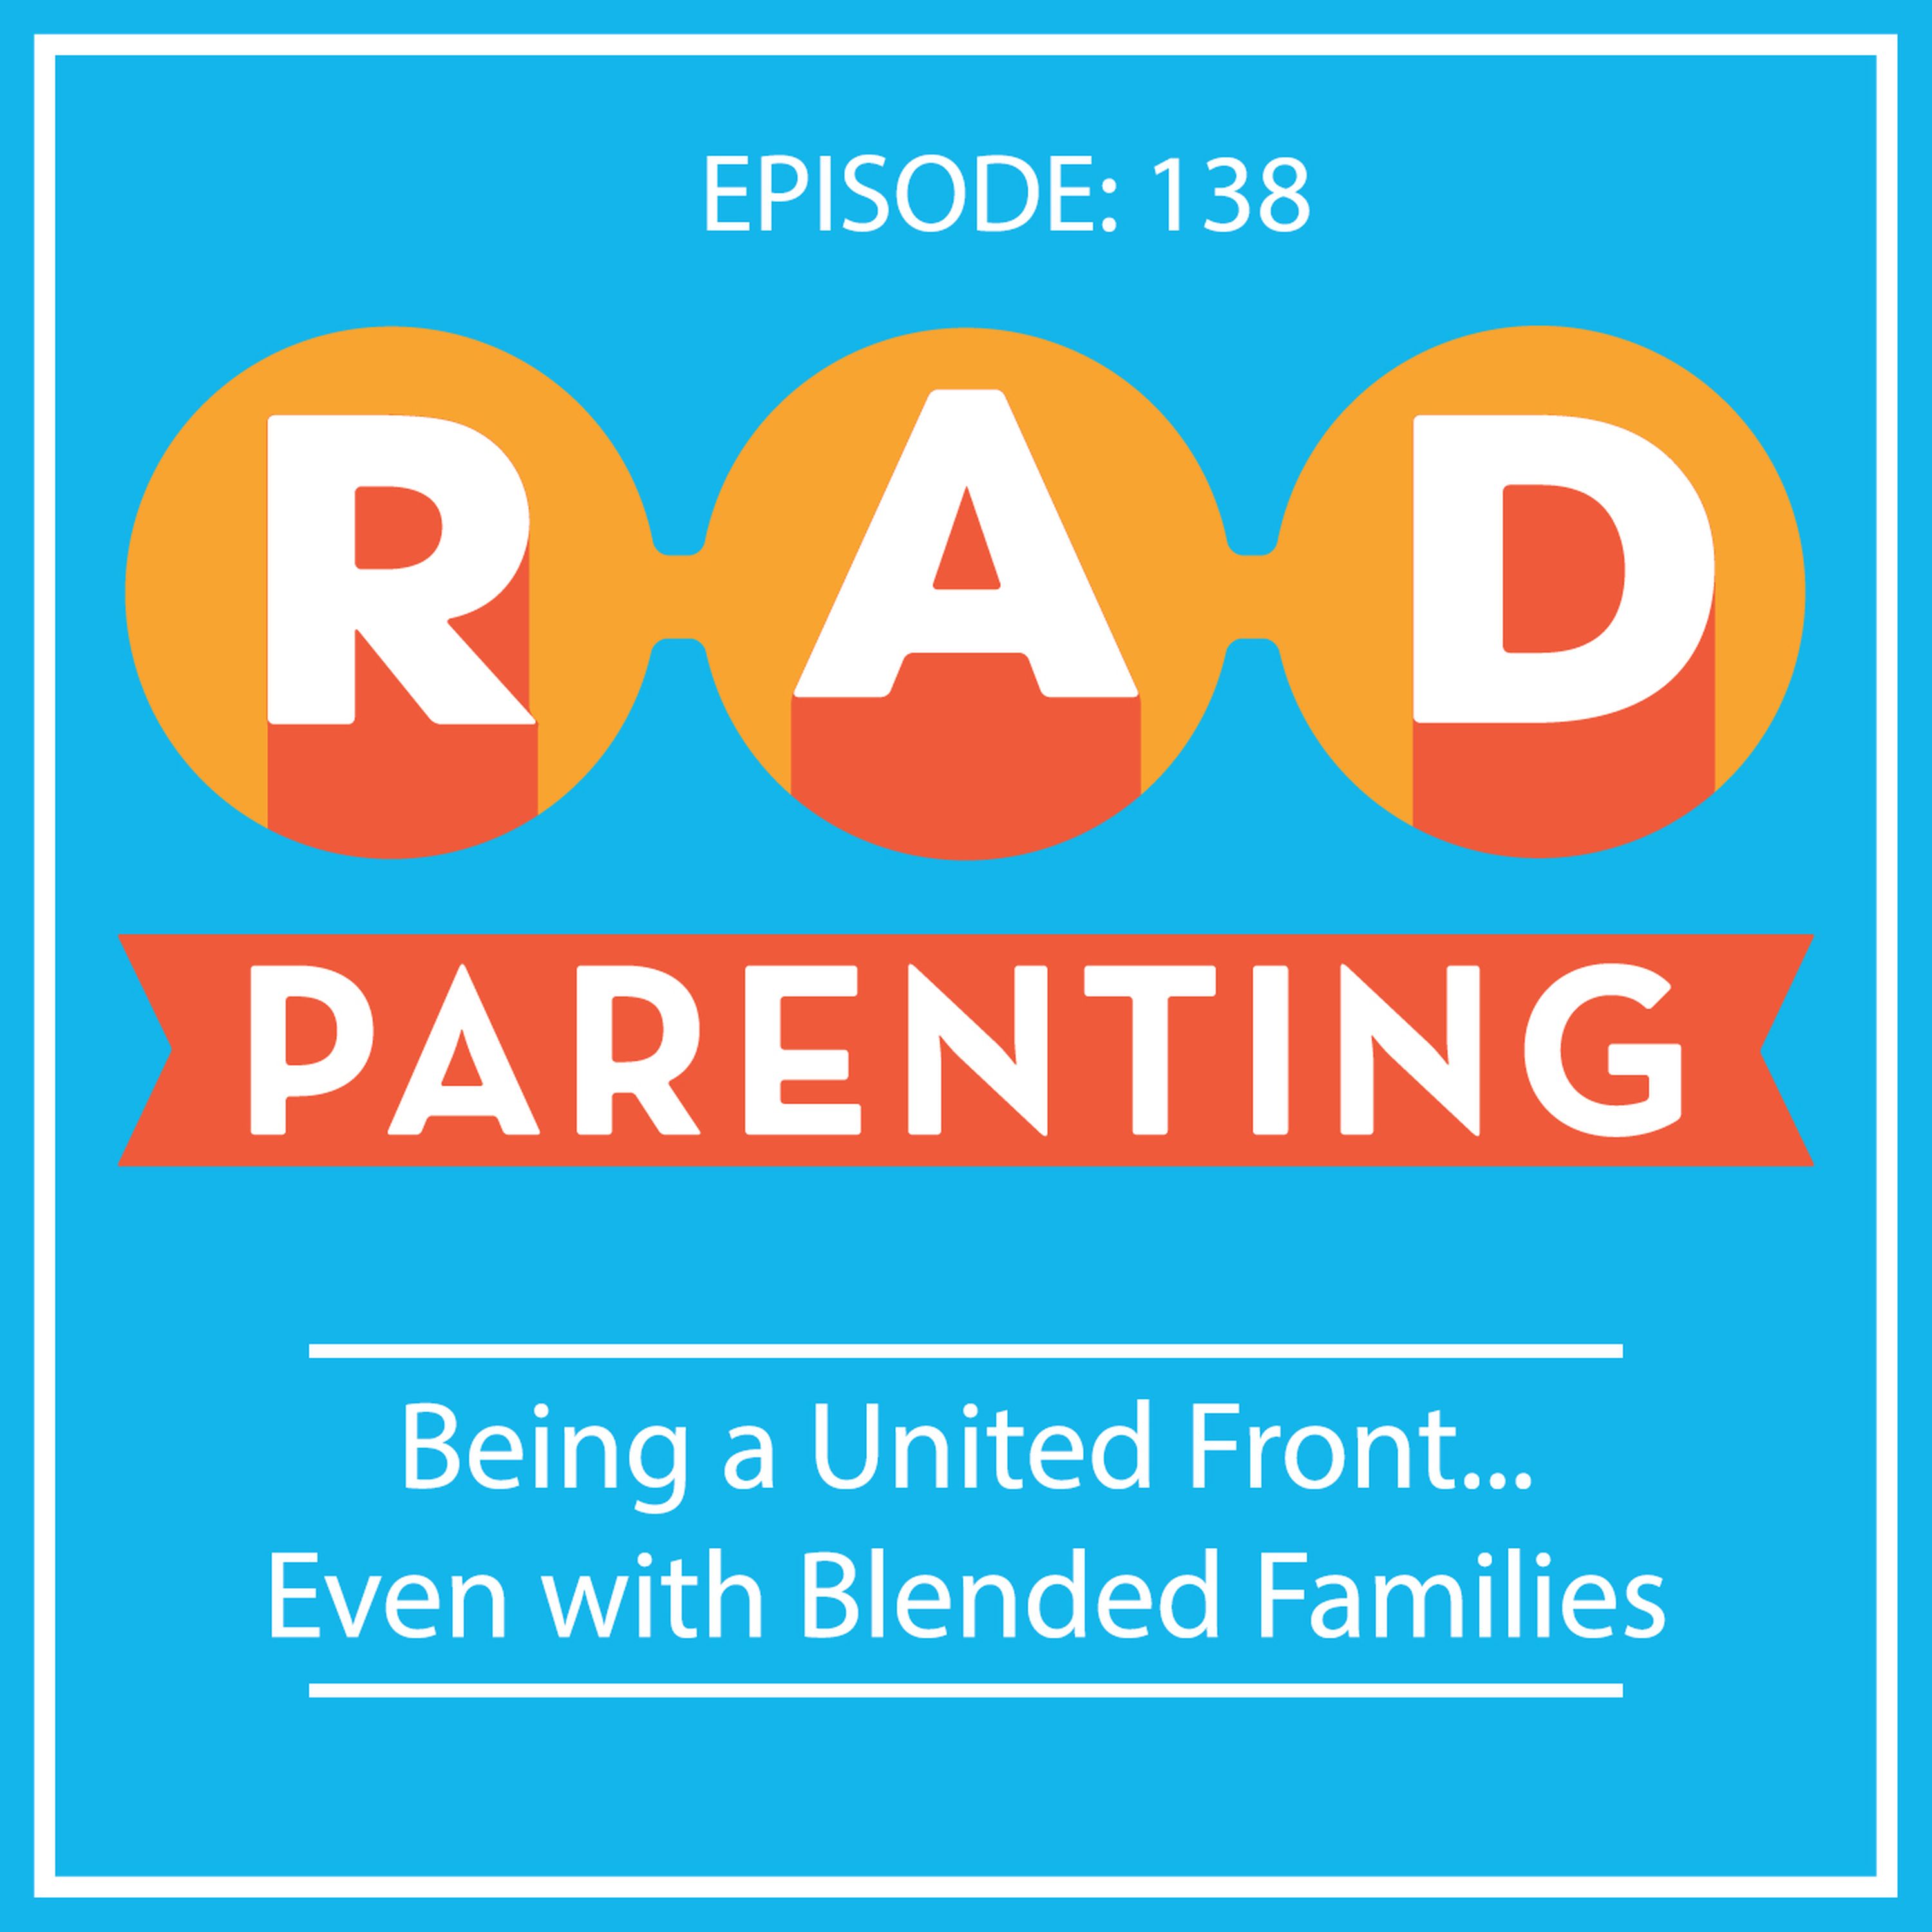 Being a United Front...Even with Blended Families